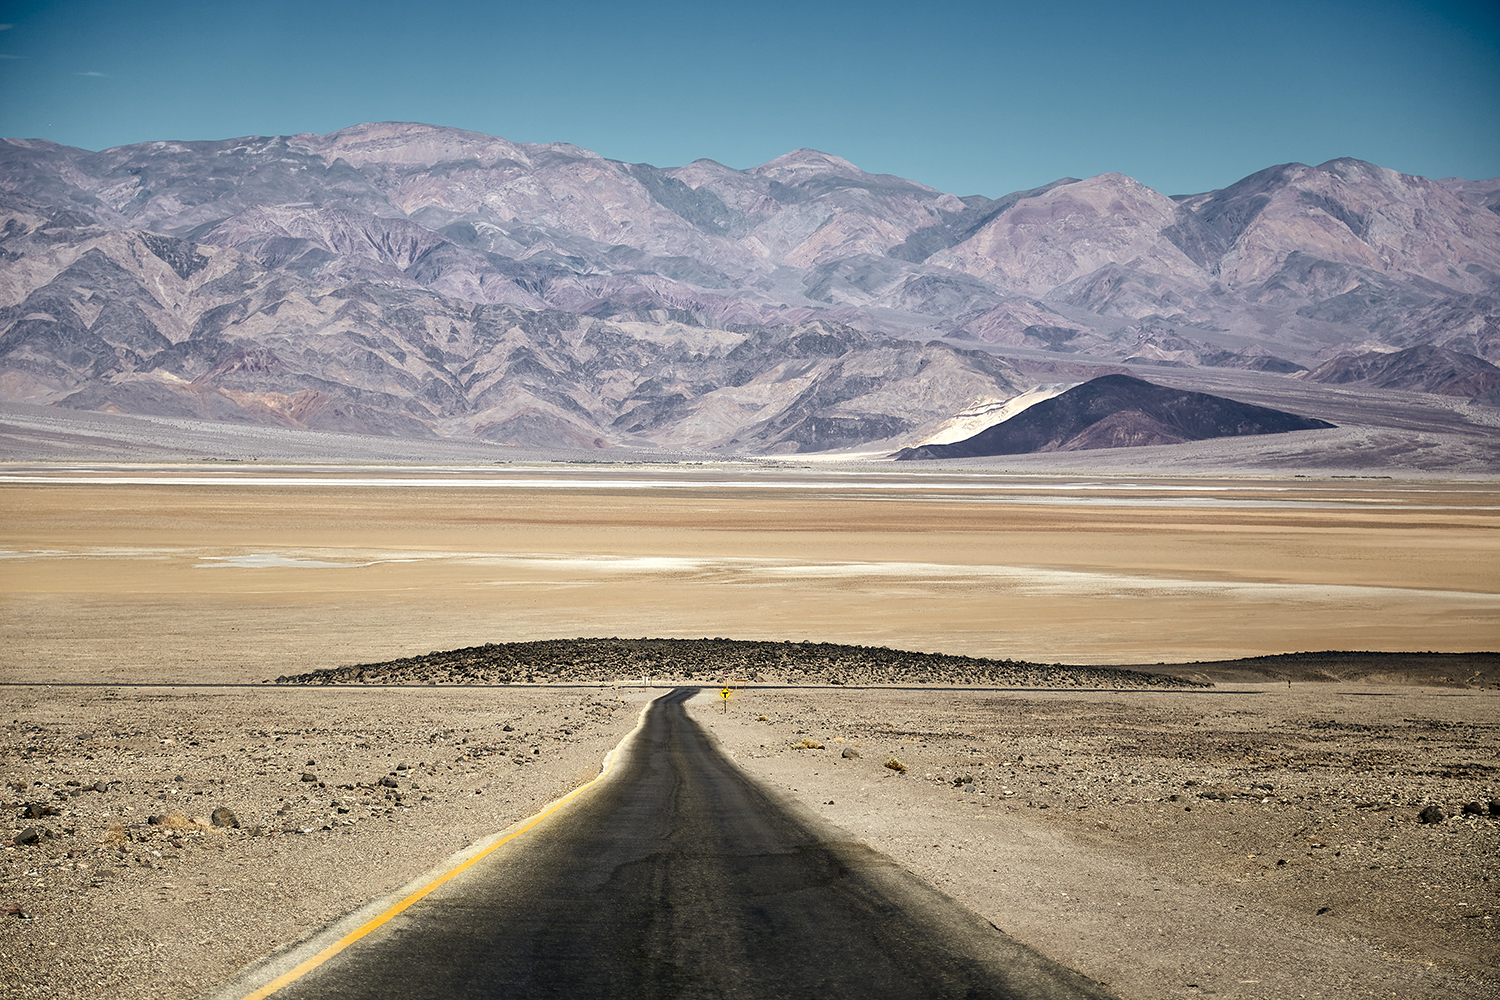 Death Valley in California is a very popular destination